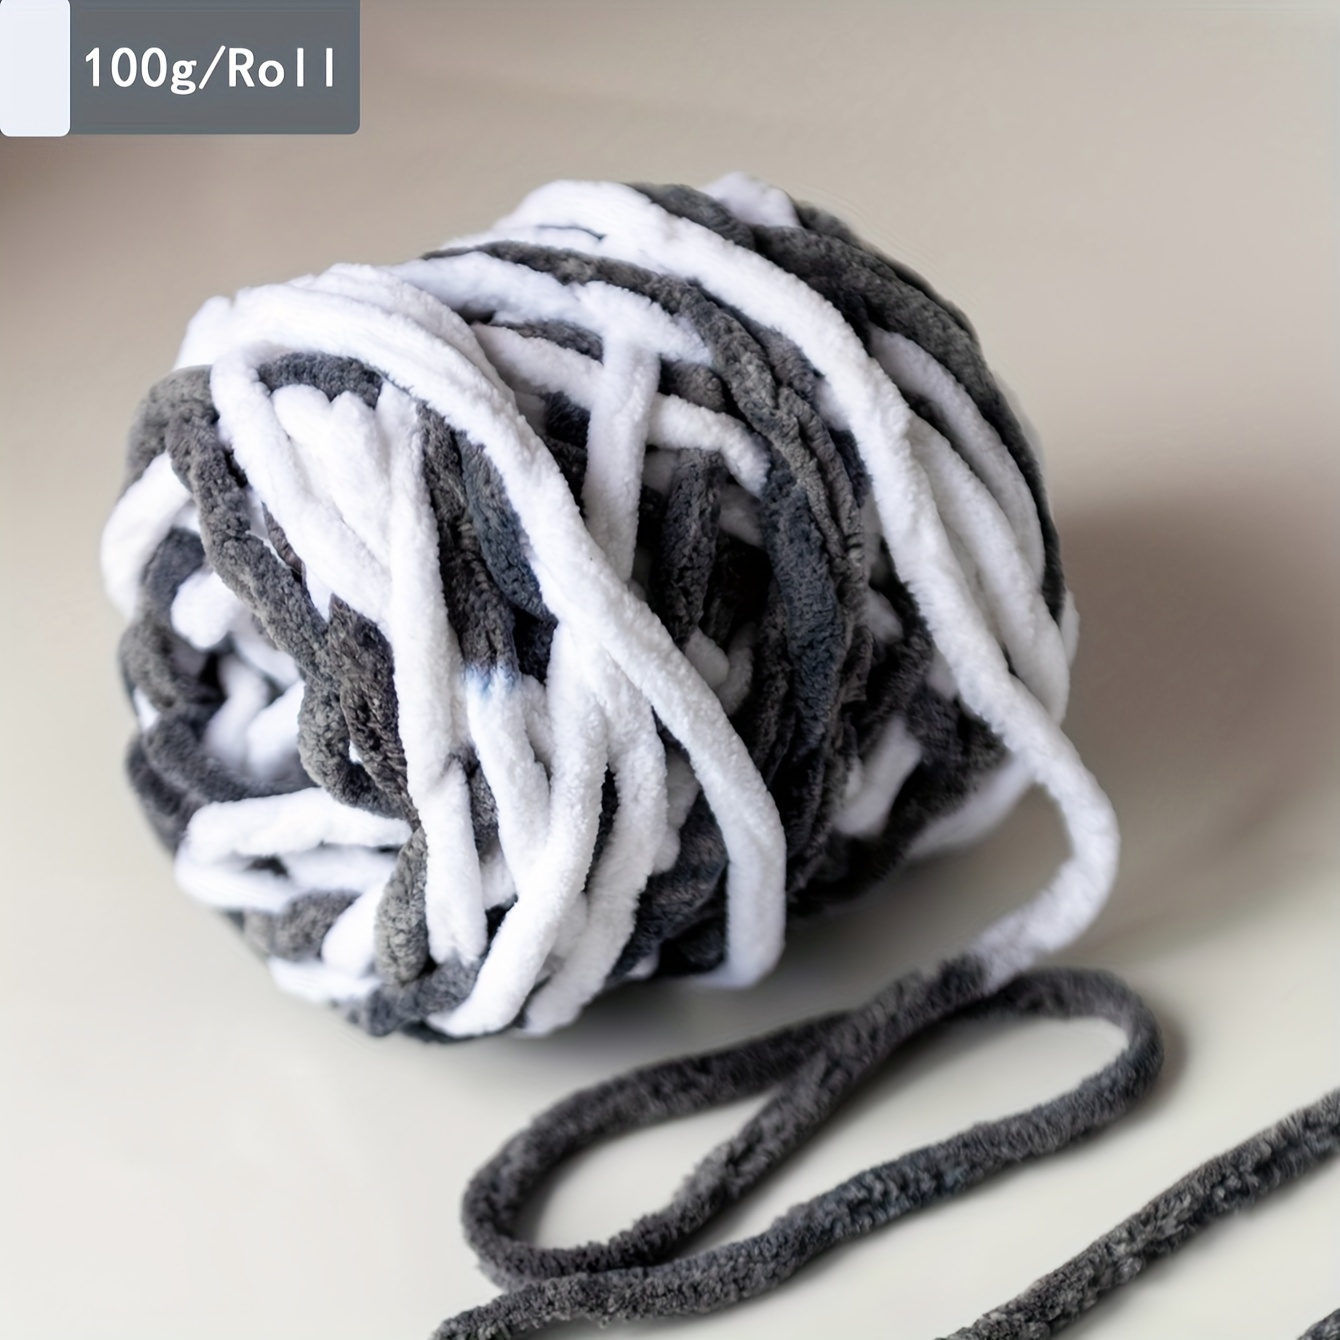 

Soft Chunky Hand Knitting Yarn, 100g Per Roll, Polyester Variegated Yarn, Black White Grey Mixed Colors, Comfortable Variegated Yarn For Crochet And Knitting Crafts